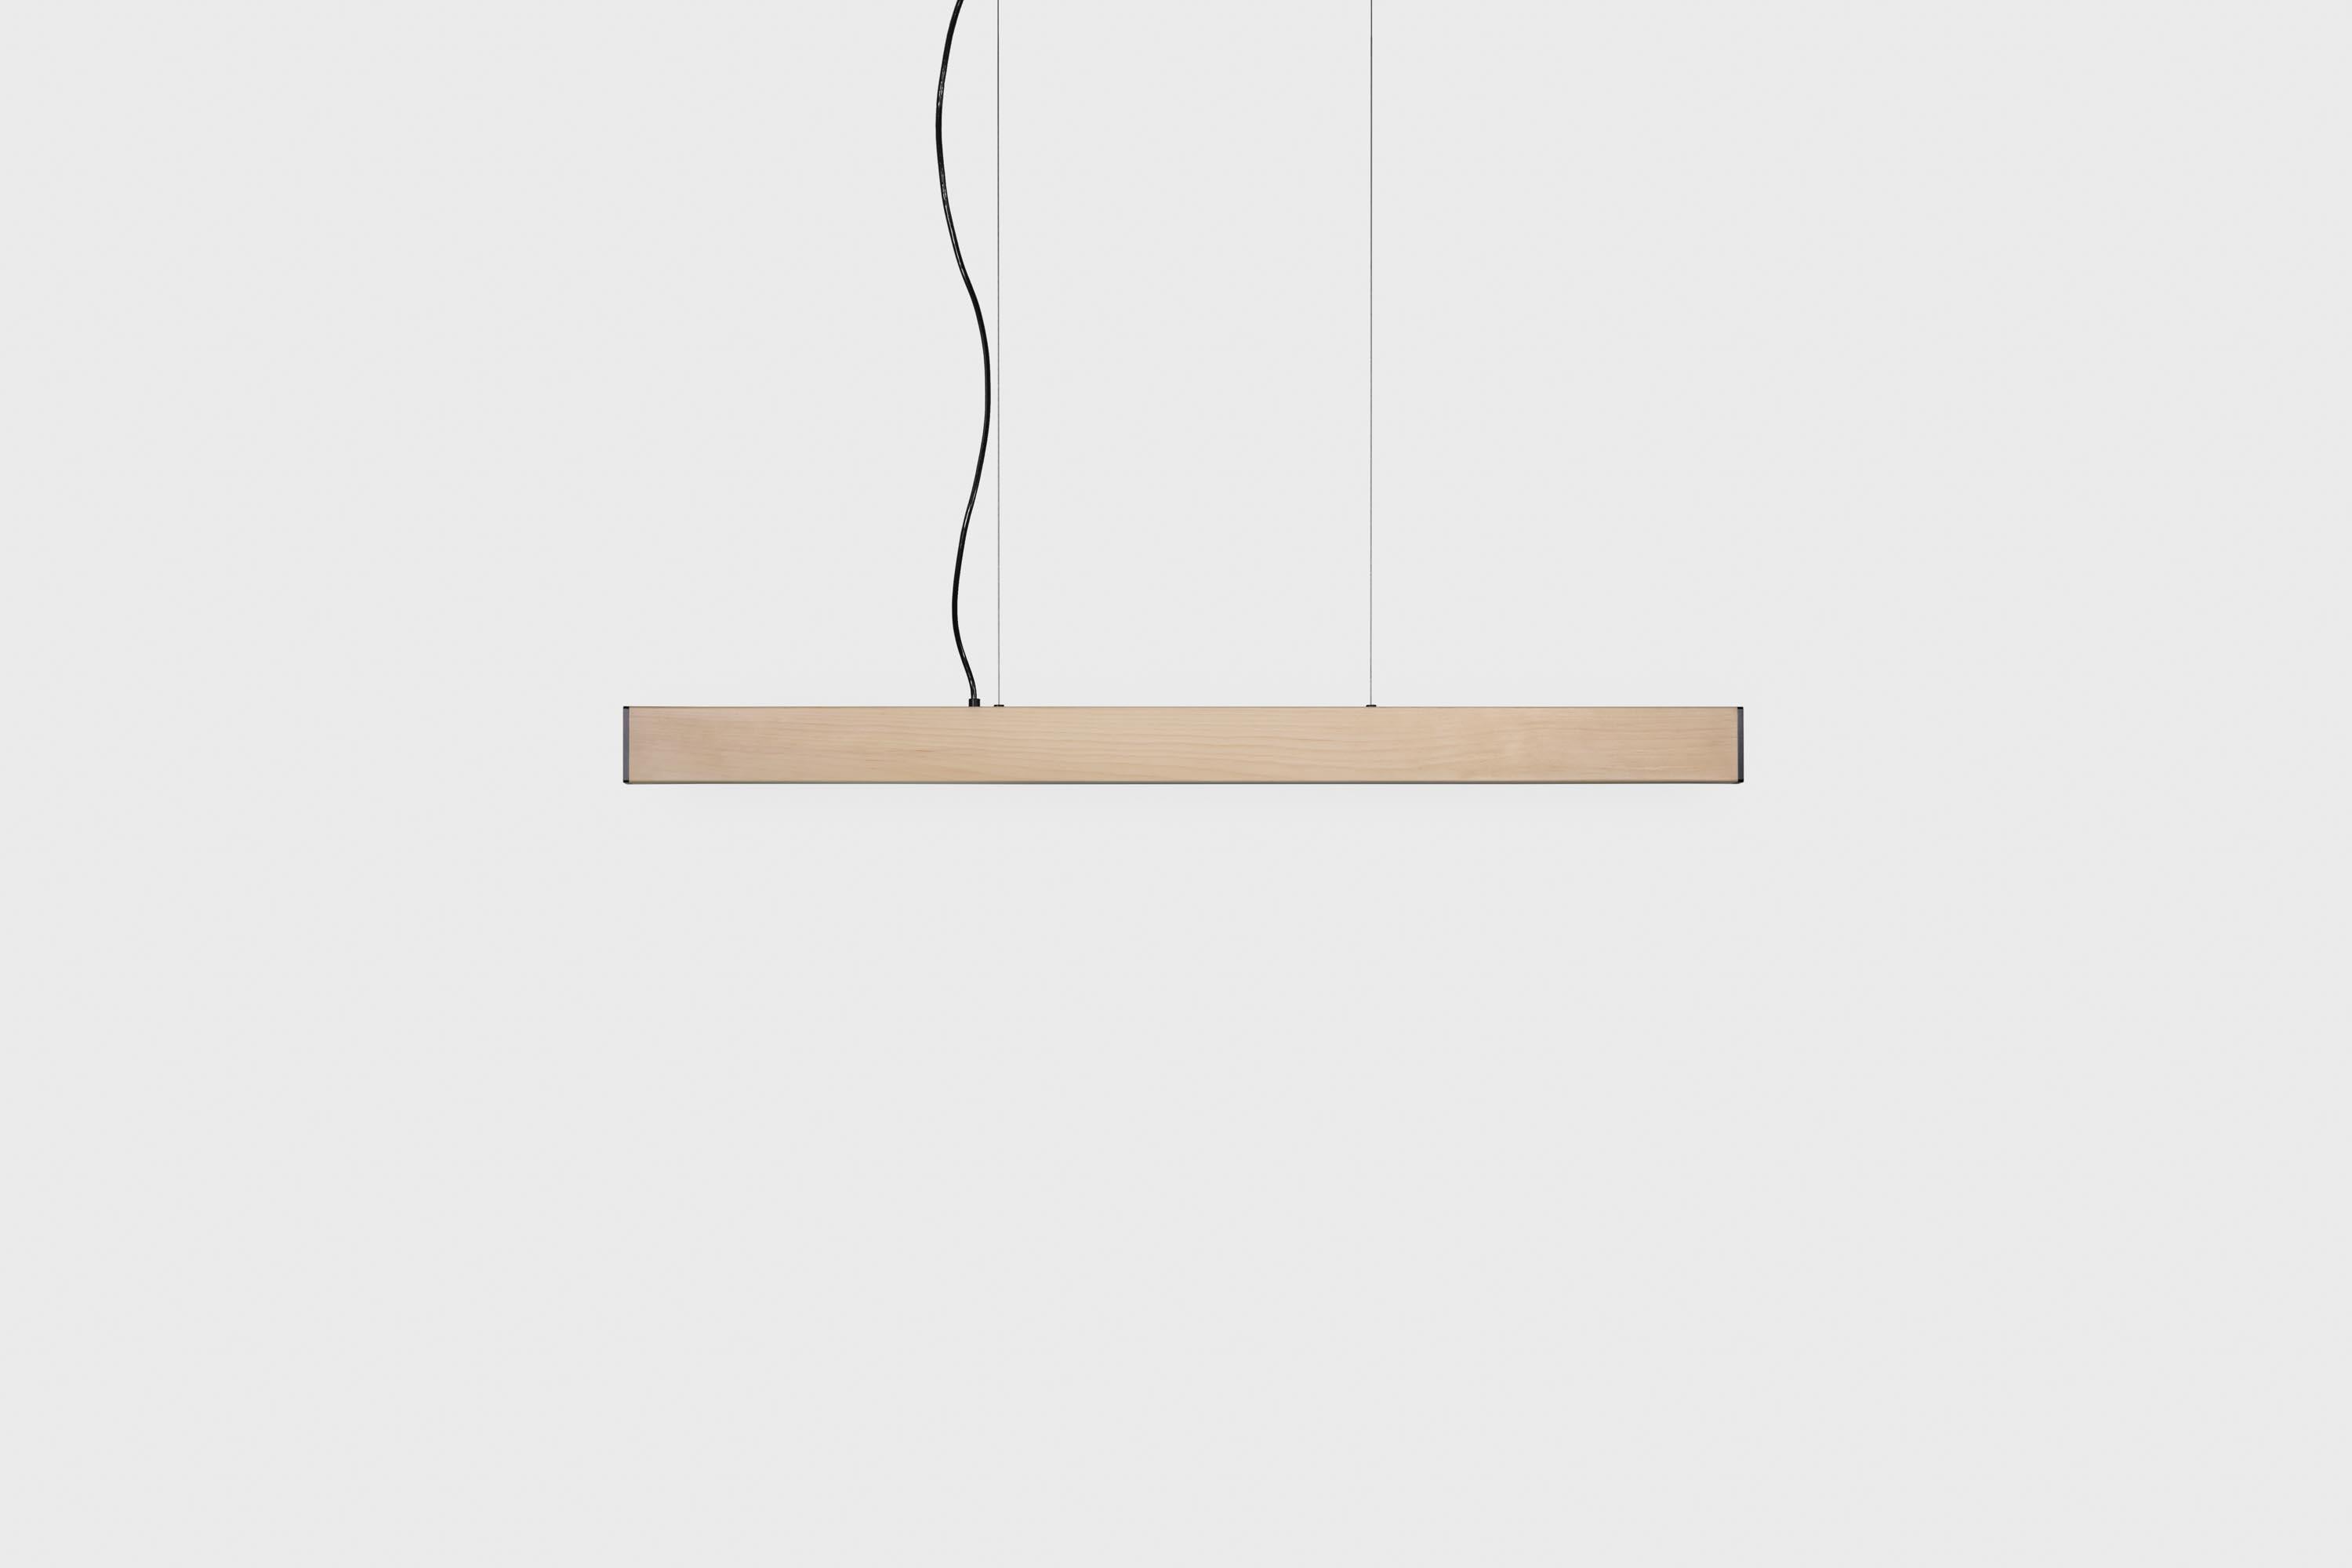 The 2x4 Pendant is made from the most common piece of dimensional lumber, the simple 2x4. The 2x4 celebrates the minimal and the ordinary. It is simple and true to its form, and with some luxurious touches, the 2x4 is transformed into a beautiful